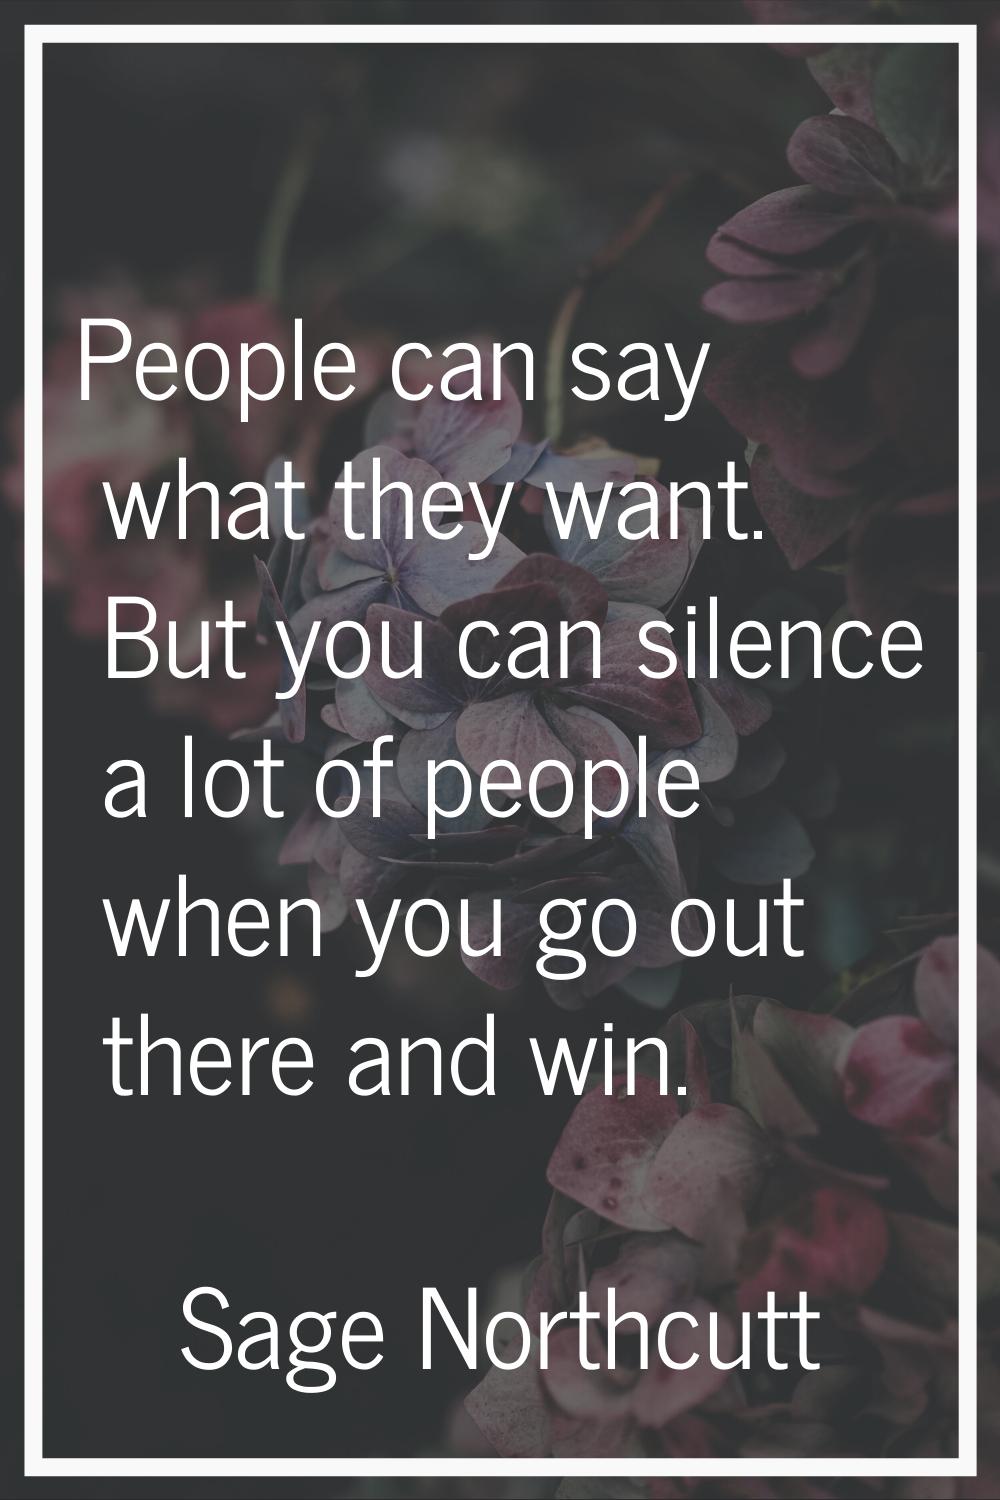 People can say what they want. But you can silence a lot of people when you go out there and win.